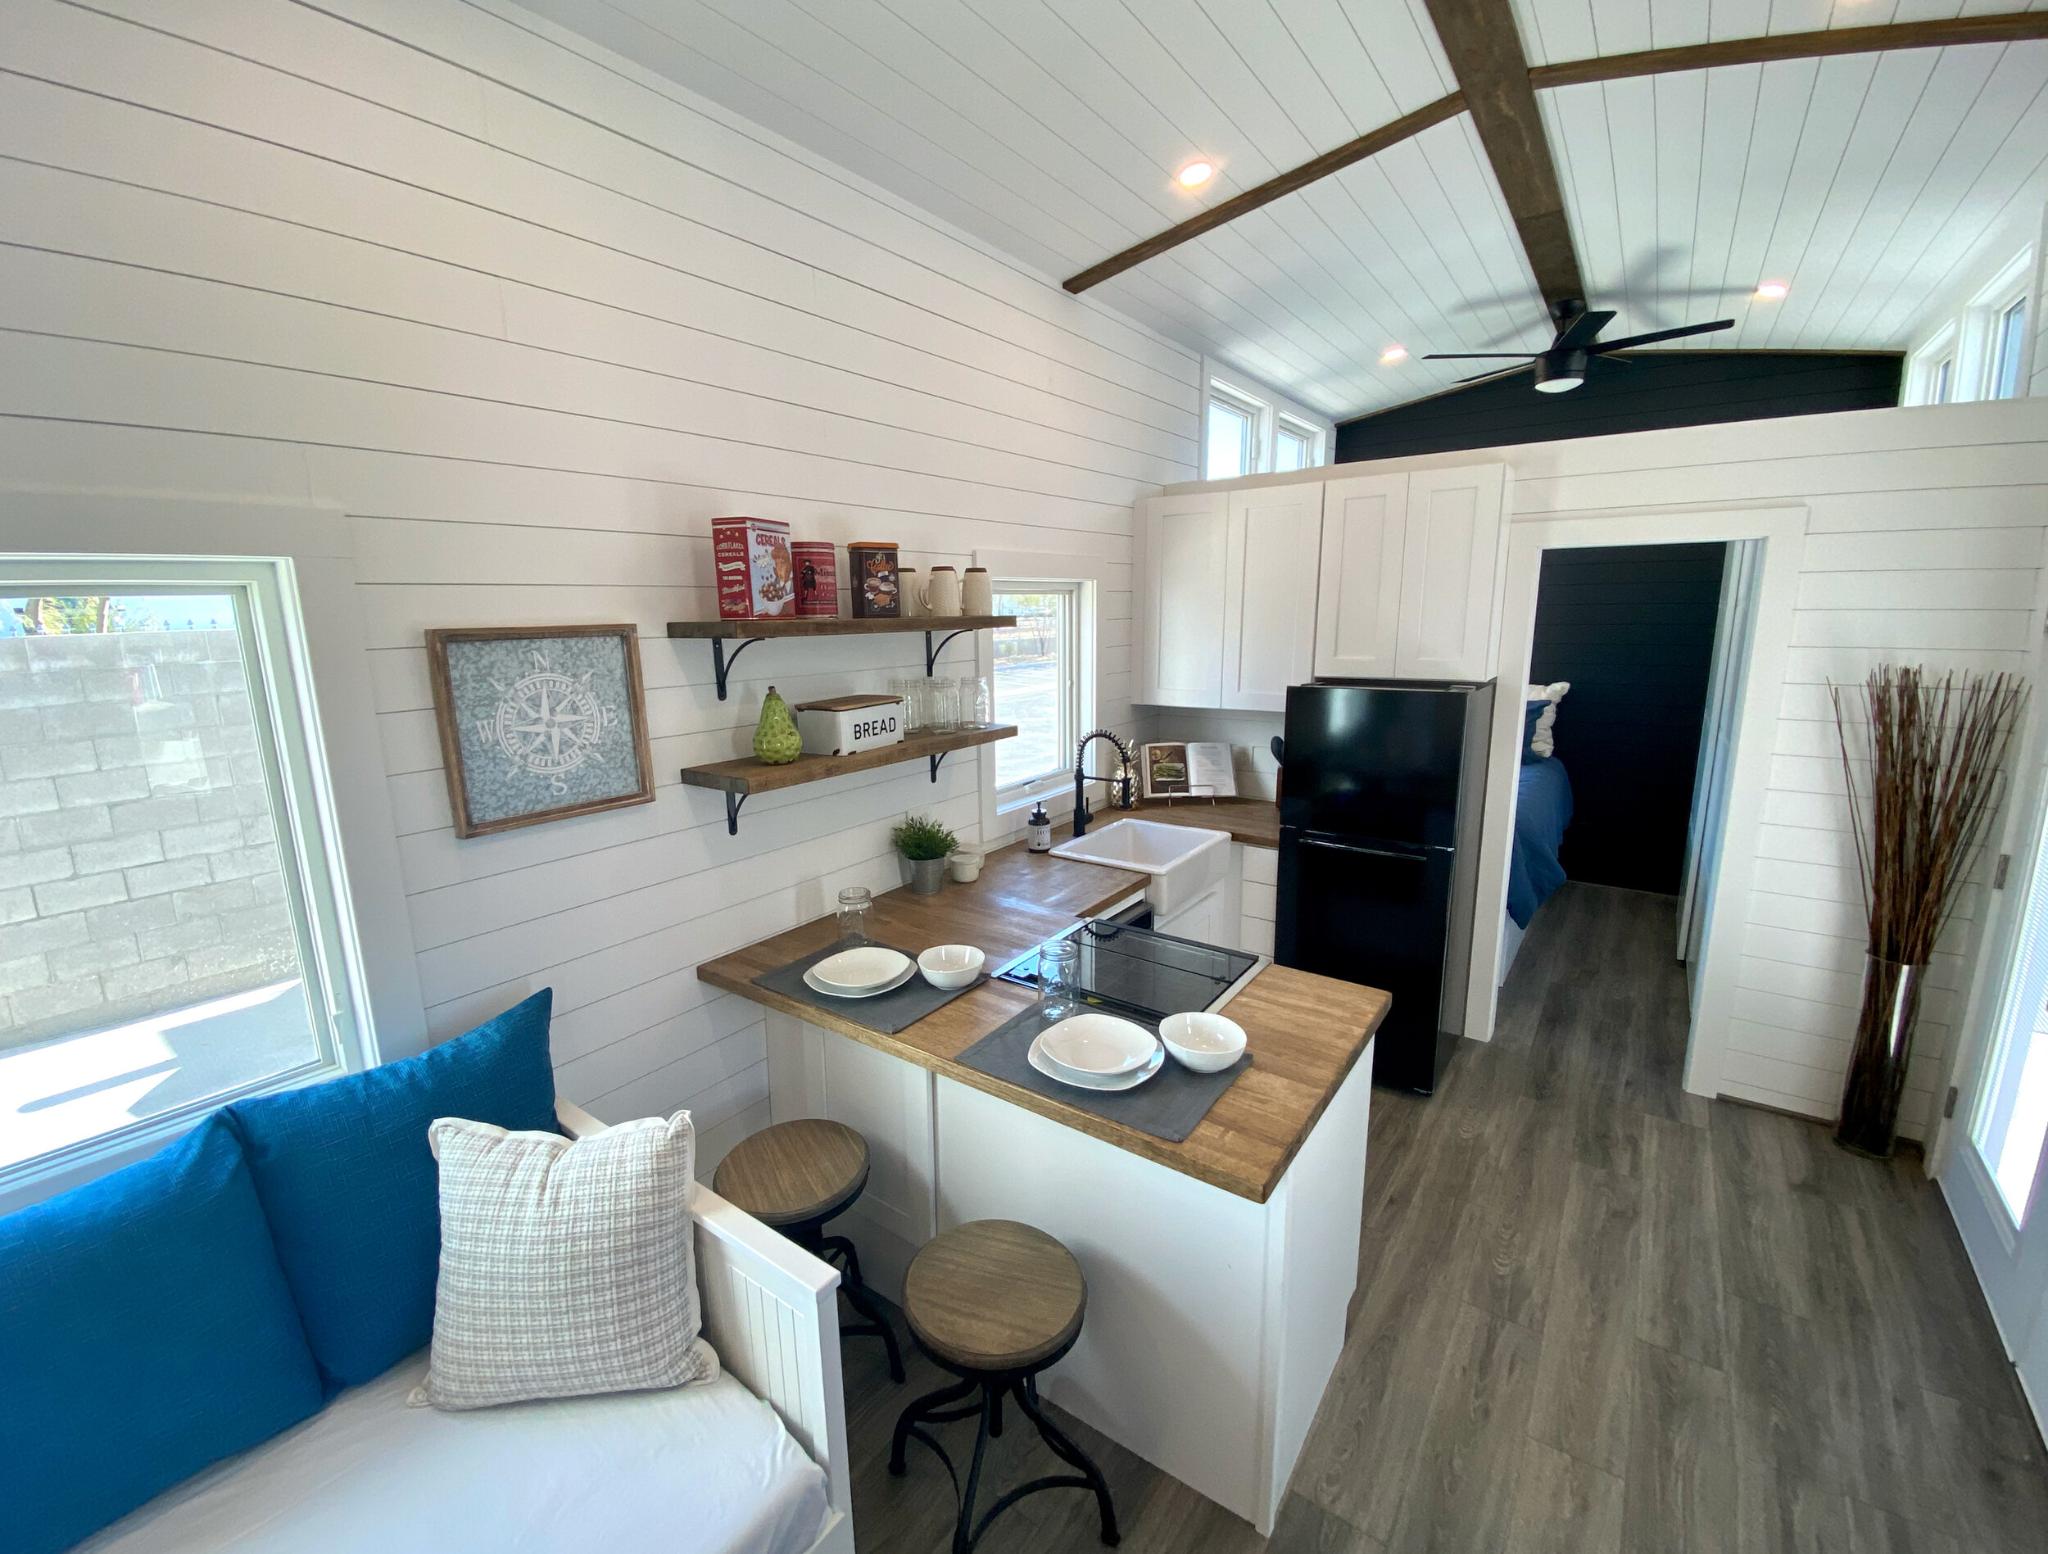 Living Room & Kitchen - Jen's Château by Uncharted Tiny Homes